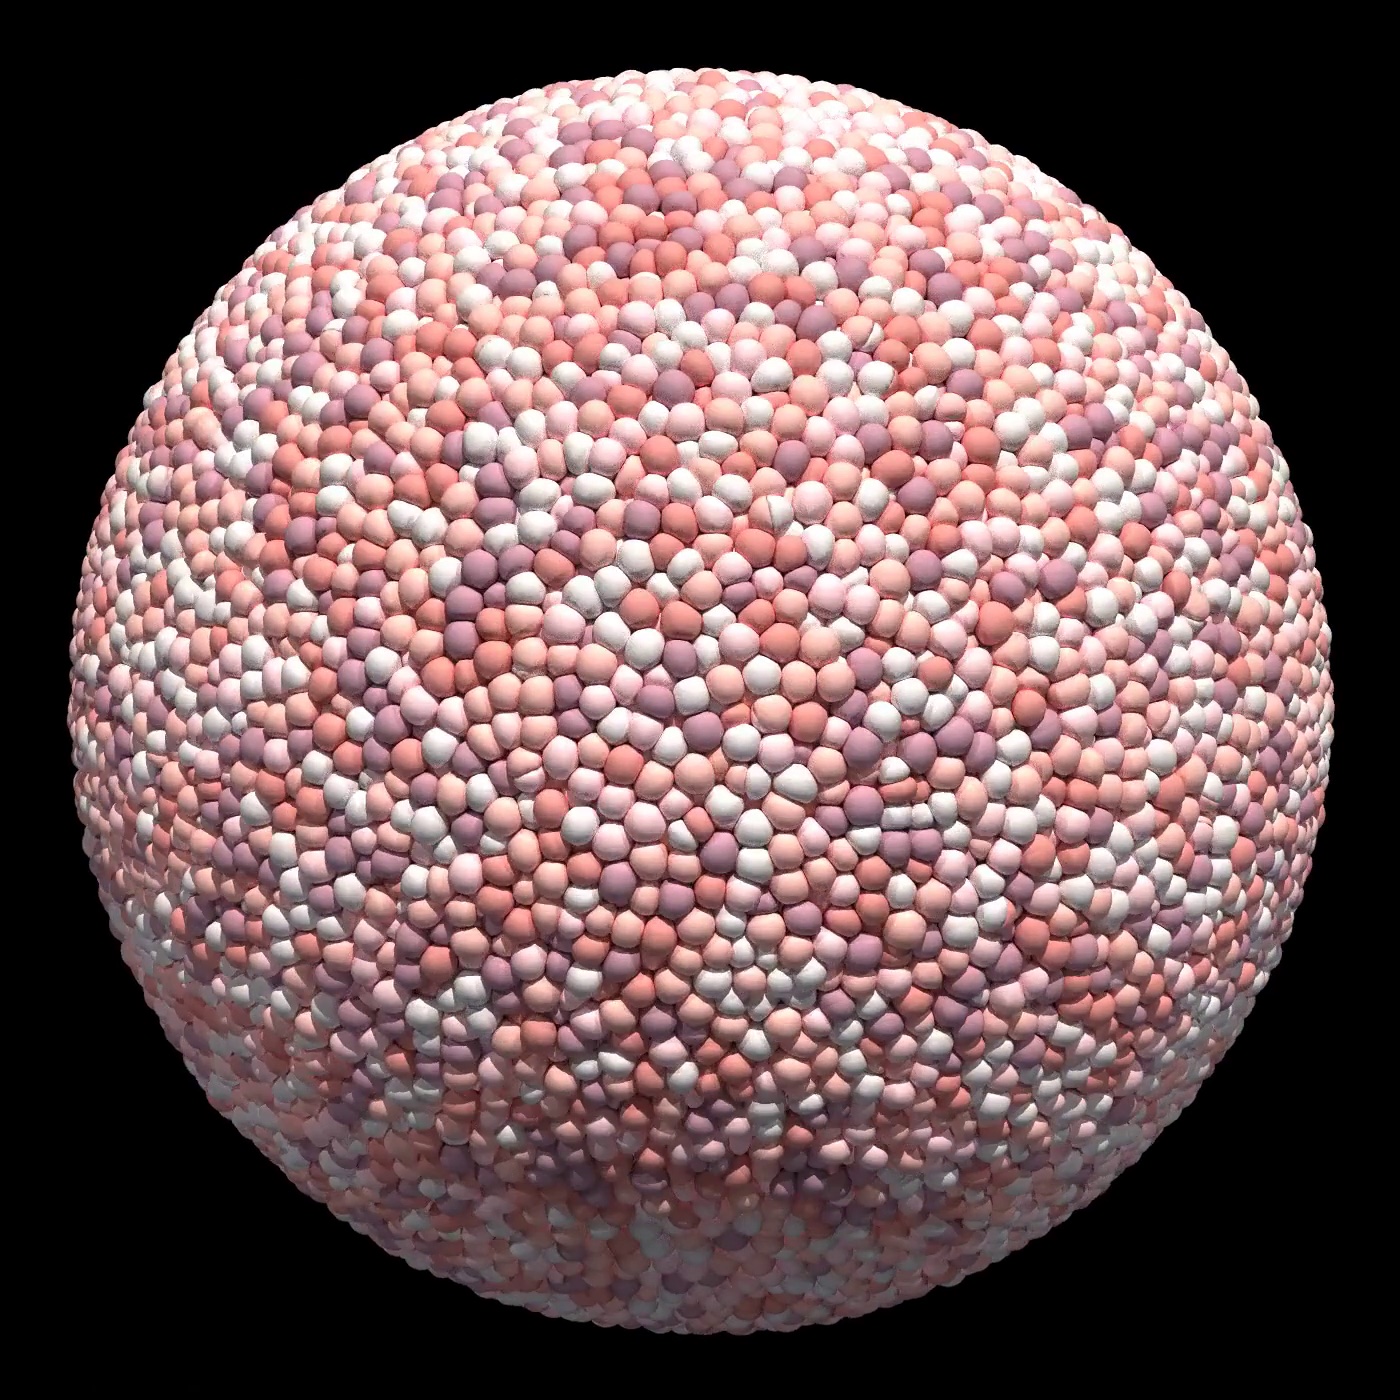 Computer simulation of a spherical tissue with about 100’000 cells simulated with SimuCell3D.